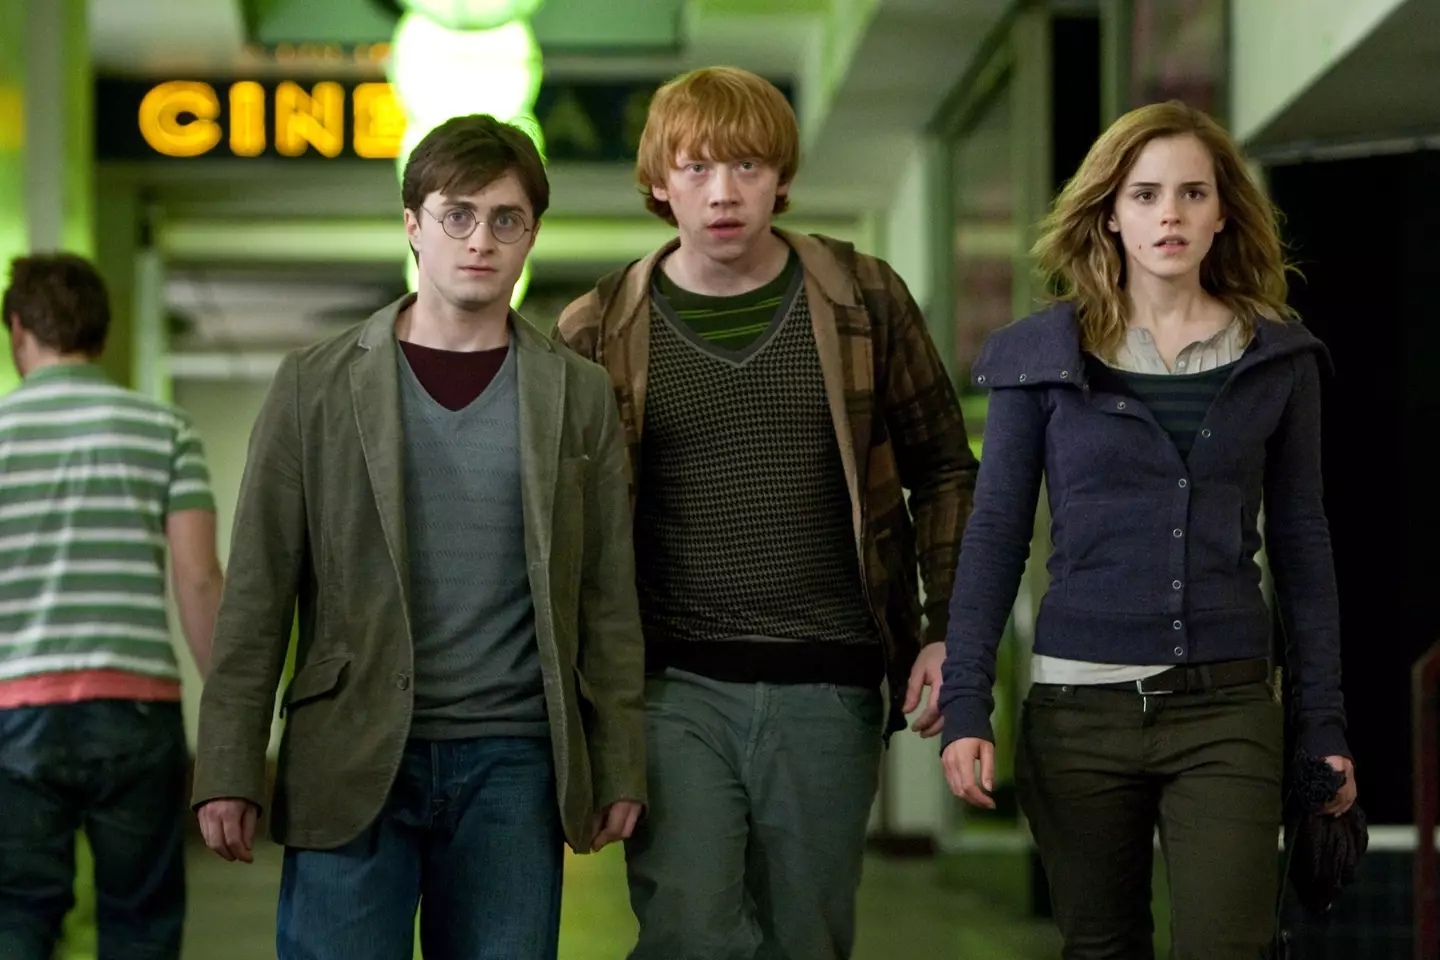 A scene from Harry Potter and the Deathly Hallows Part 1.